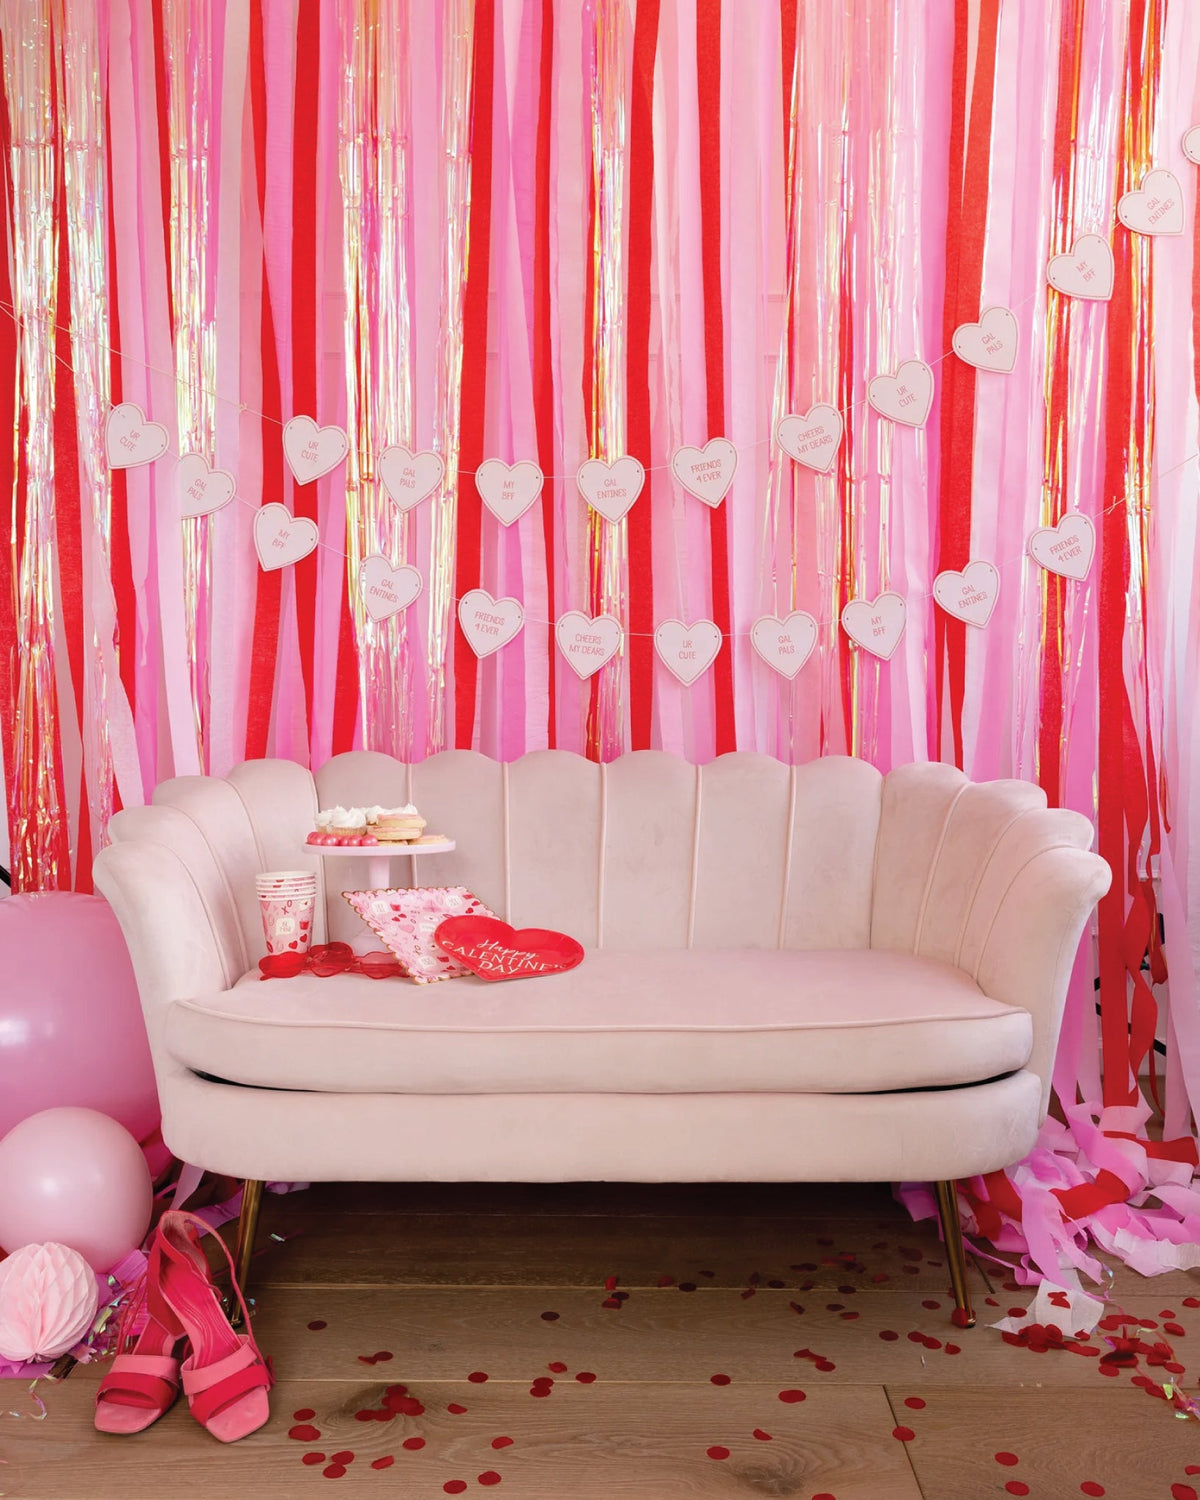 Pink & Purple Fiesta Streamer Backdrop for Enchanted Party Decorations